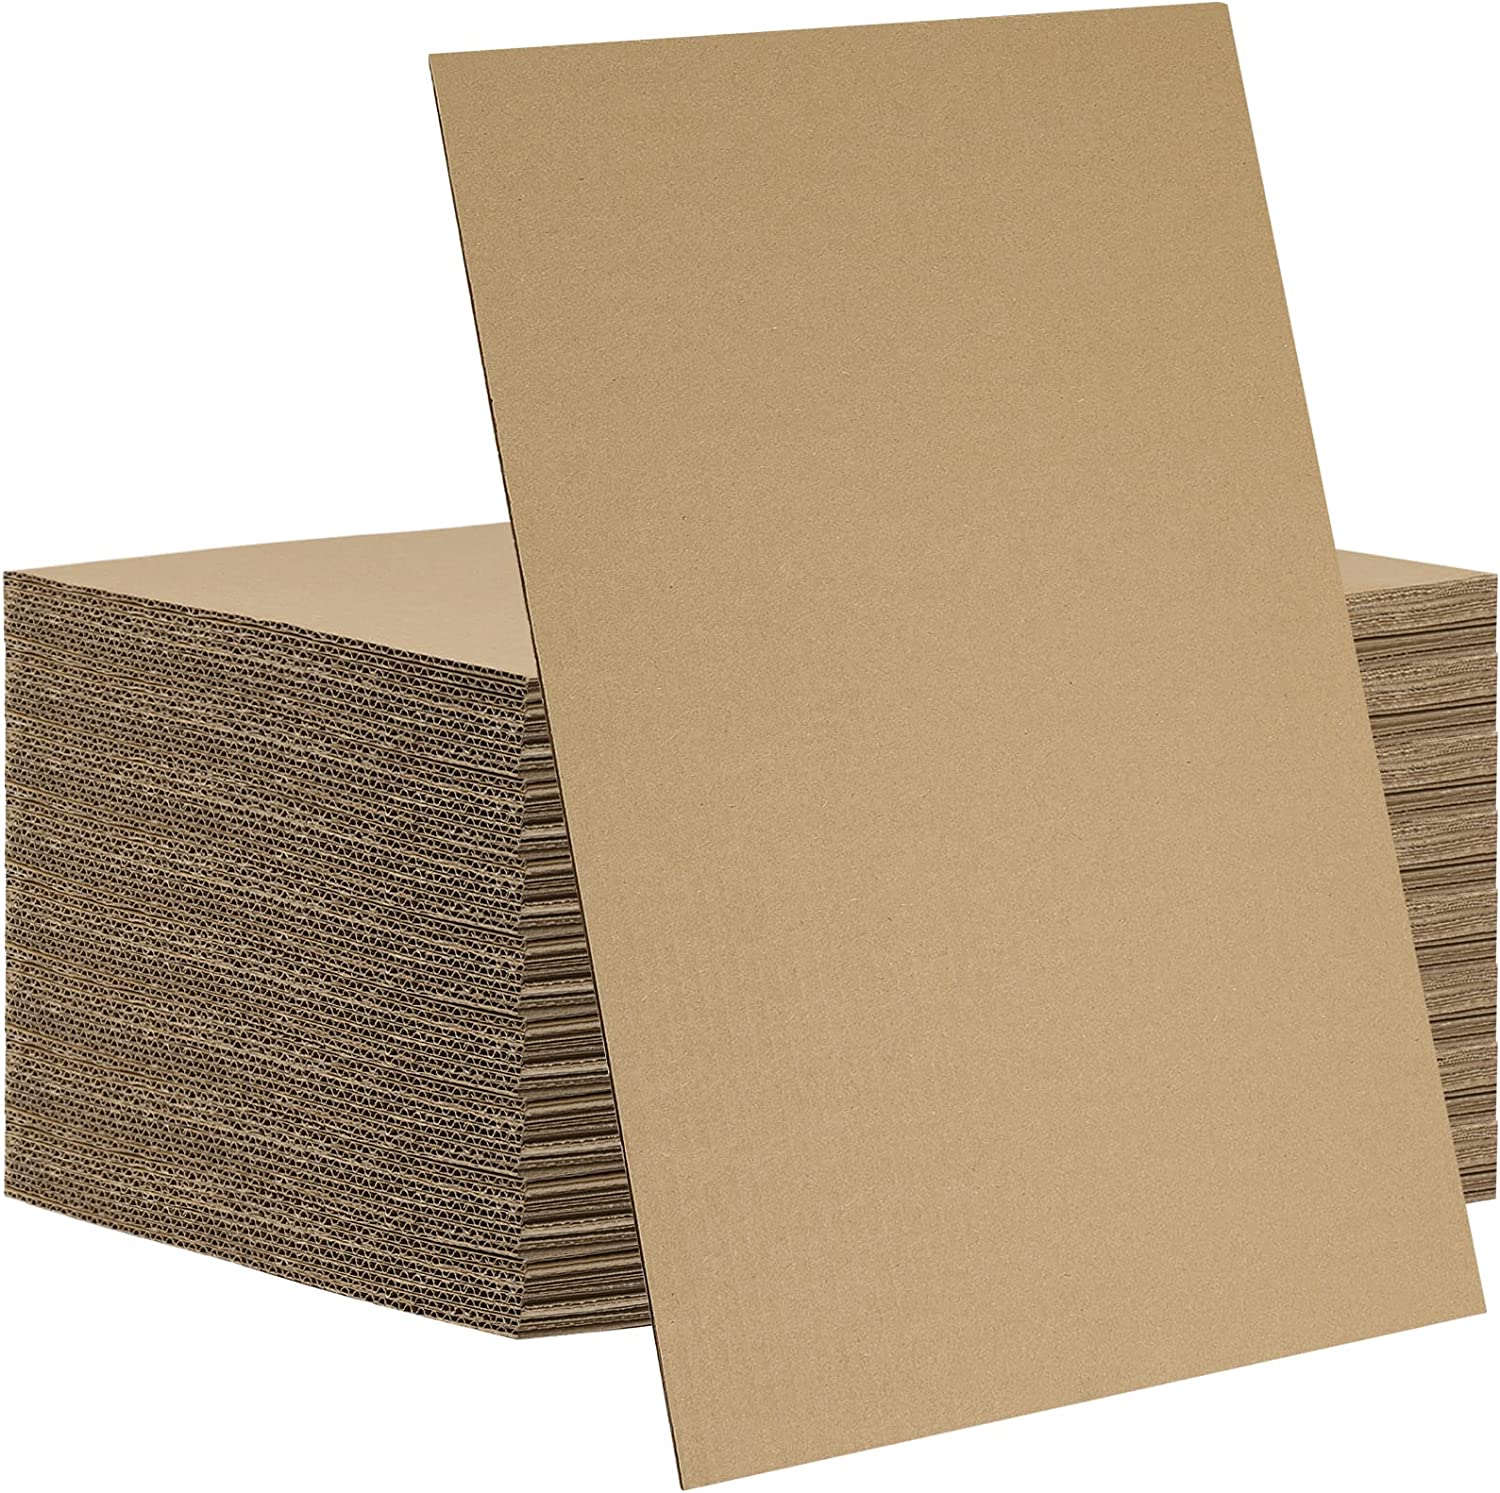  Mat Board Center, 50 Pack 11x14 Corrugated Cardboard Sheets,  1/16 inch thick, Flat Cardboard Inserts for Mailing, Packaging & Shipping,  Cardboard Backing, Craft Card Board (White on one side) : Office Products